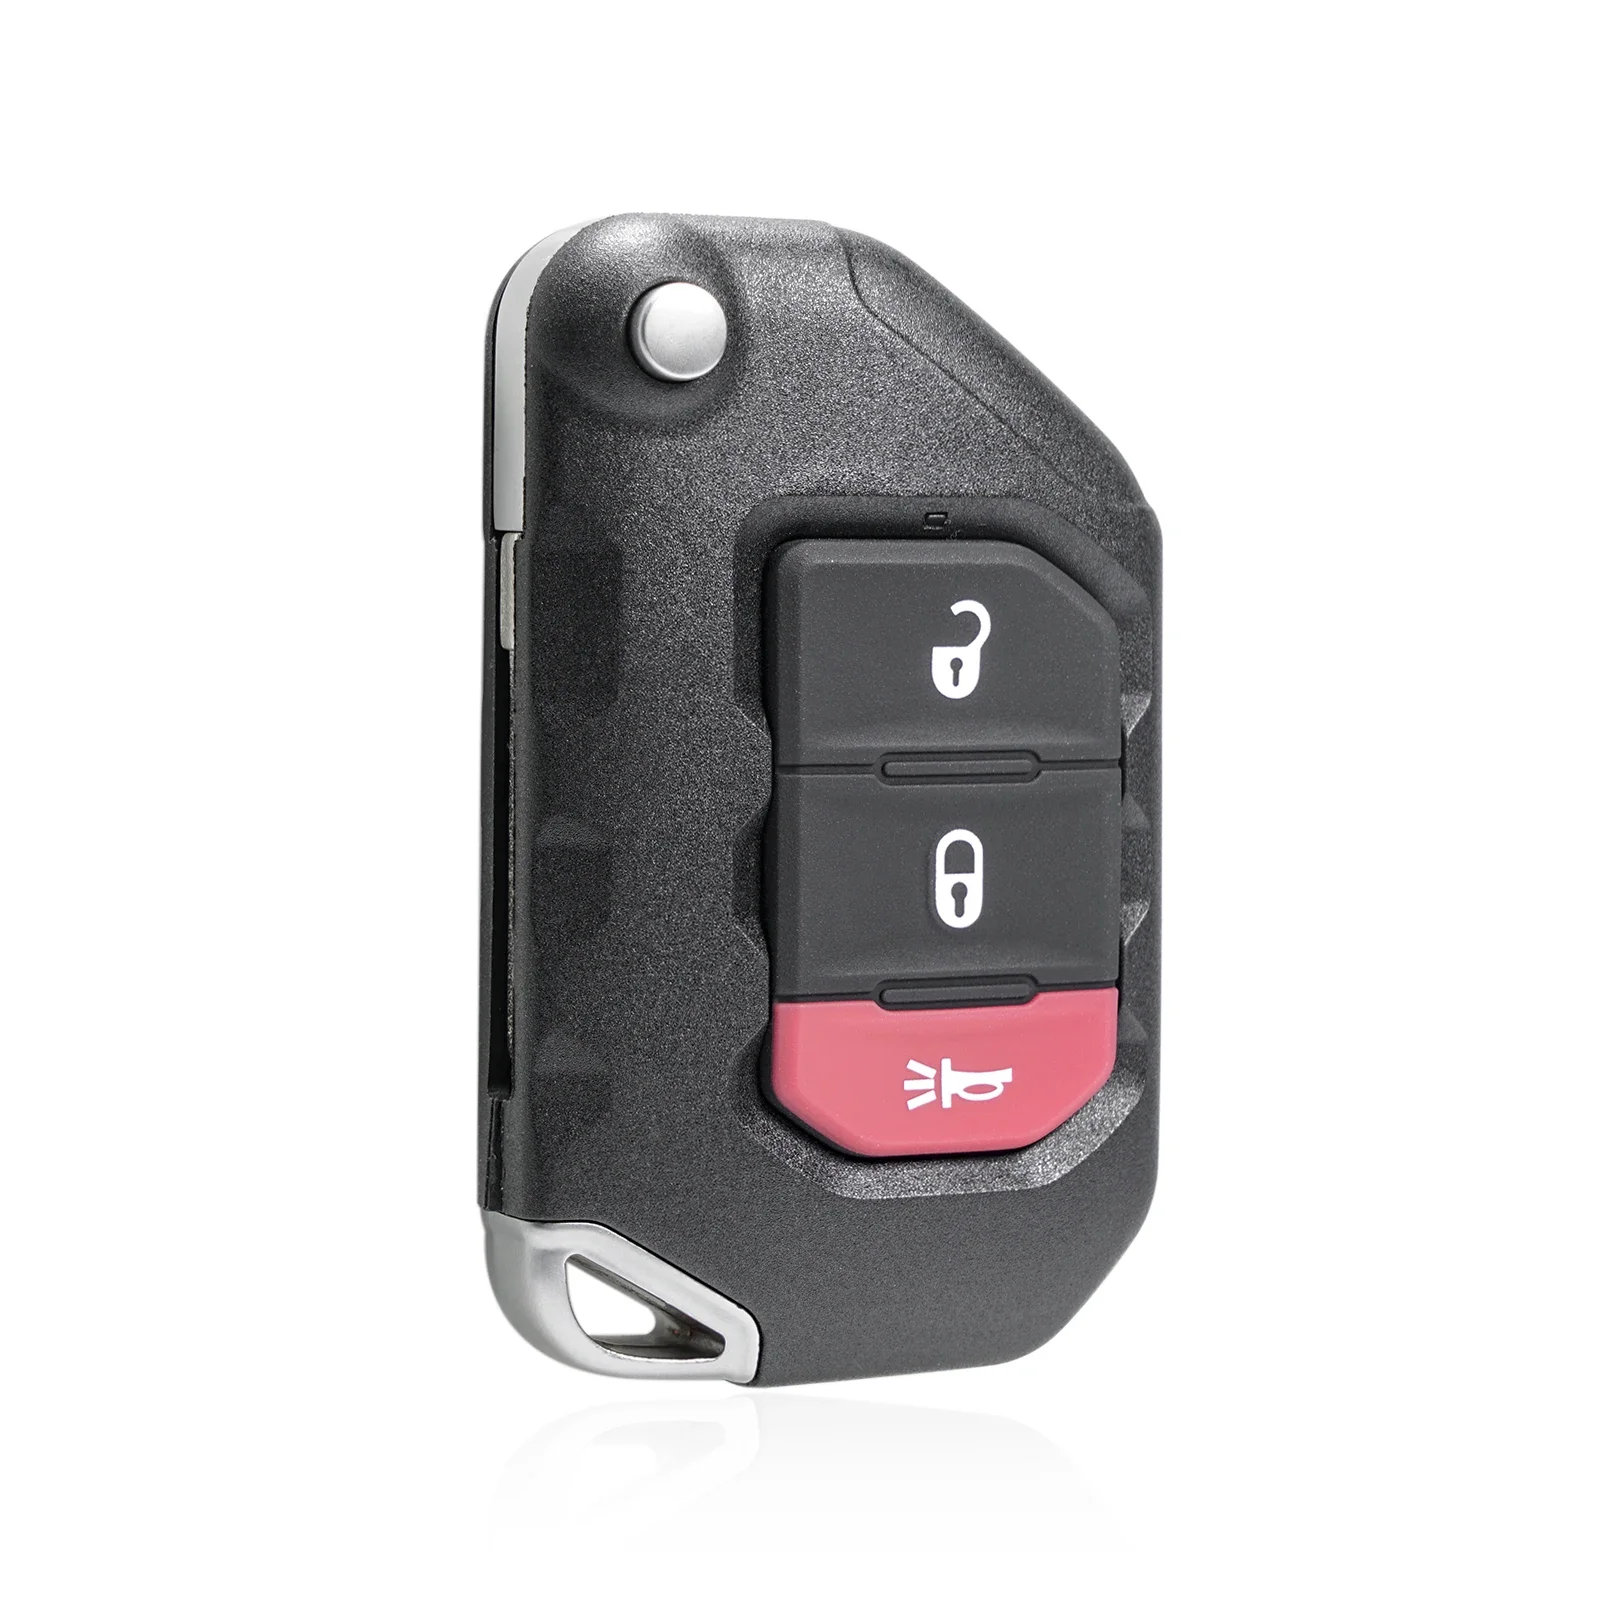 3Buttons Flip Keyless Entry Remote Key Compatible with Jeep Wrangler 2018 - 2020, Gladiator 2020| Fits for OHT1130261 68416782AA